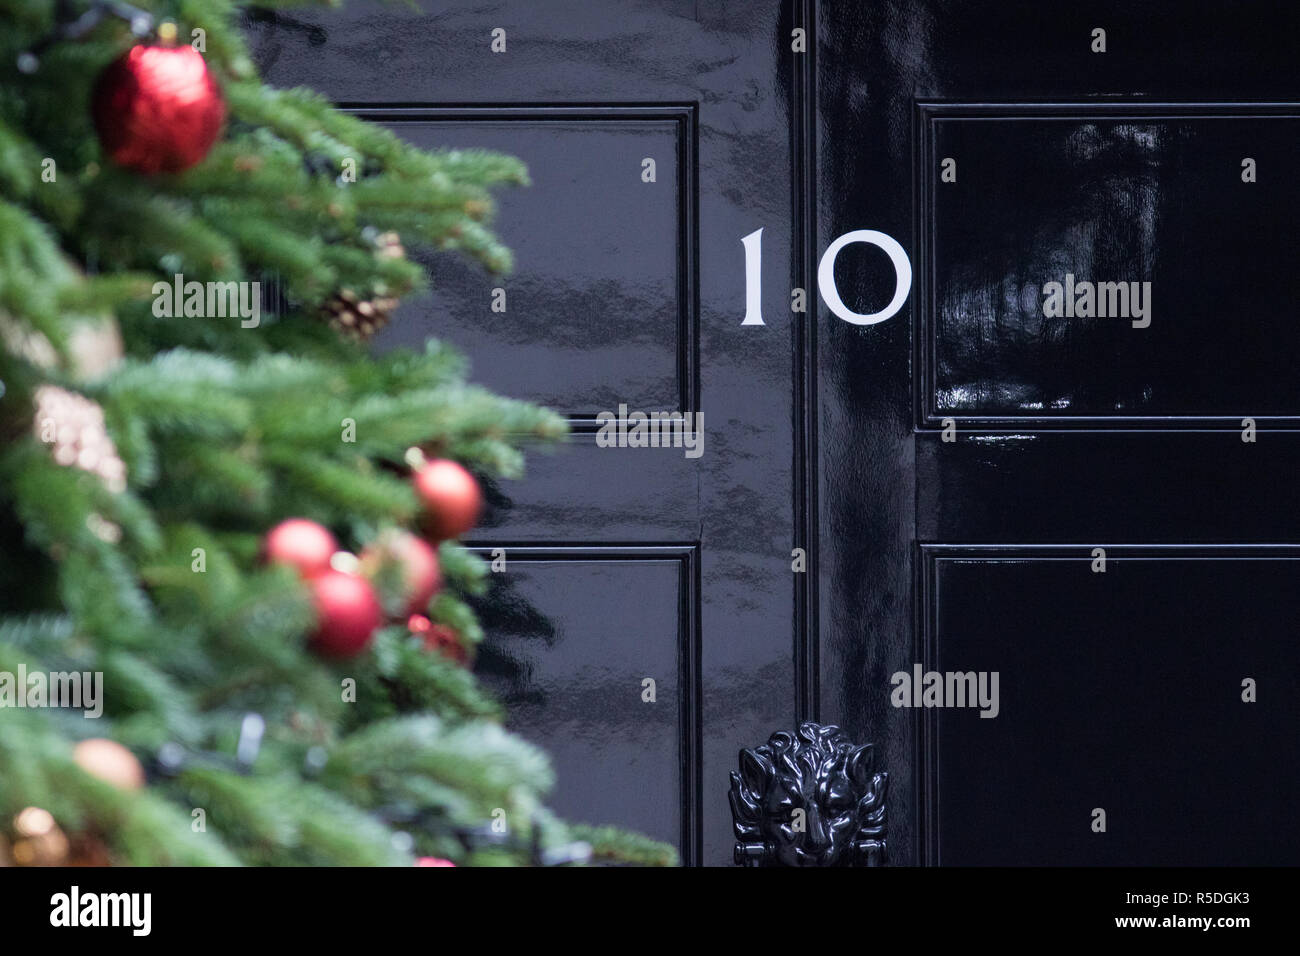 Downing Street, London, UK. 1st December 2018. A giant spruce Christmas tree with decorations is installed in front of the Prime Minister's Residence at 10 Downing Street London. Prime Minister Theresa May has threatened  to 'cancel Christmas' for Brexit if she loses the meaningful vote on 11 December and Brexit Deal Agreement is voted down. Credit: amer ghazzal/Alamy Live News Stock Photo